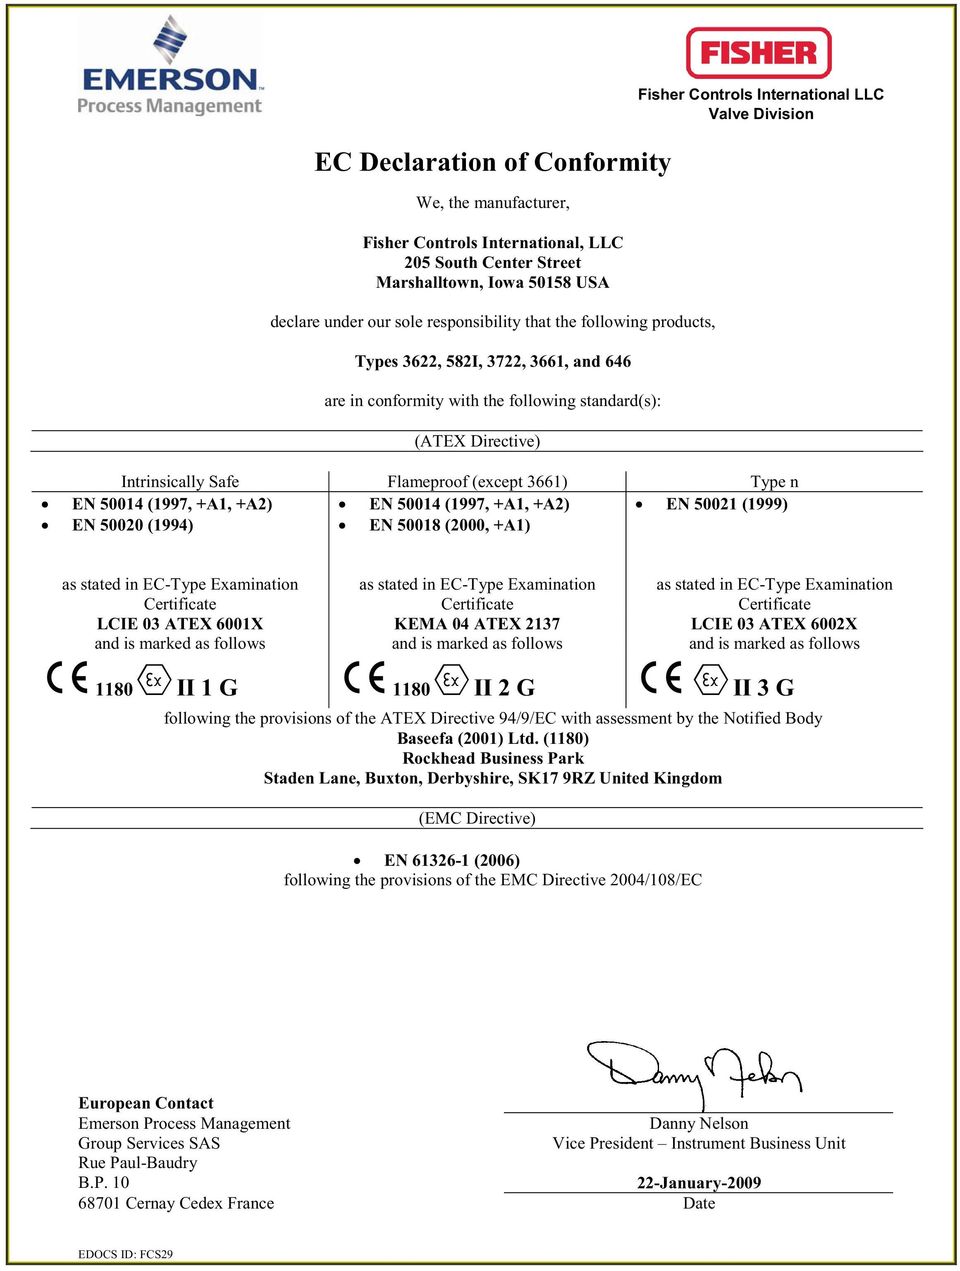 2137 LCIE 03 ATEX 6002X and is marked as follows and is marked as follows and is marked as follows 1180 II 1 G 1180 II 2 G II 3 G following the provisions of the ATEX Directive 94/9/EC with